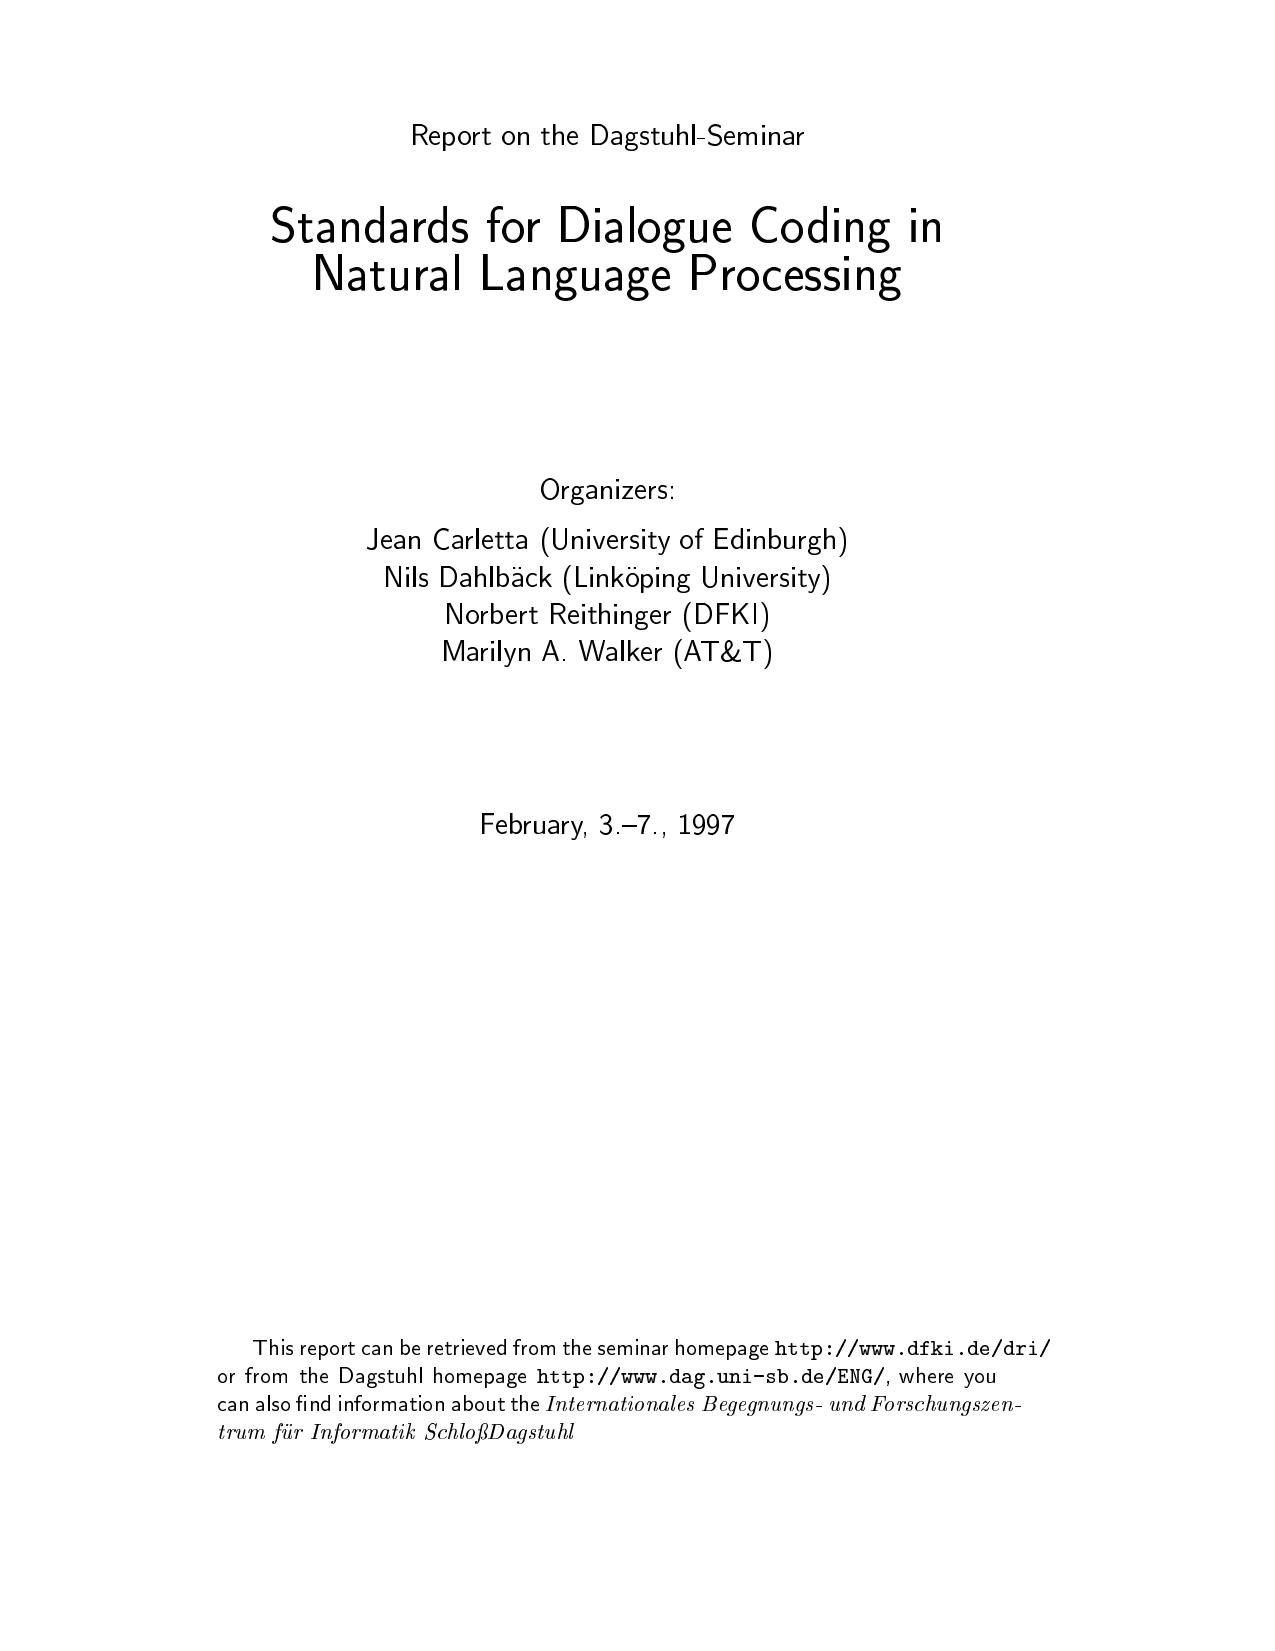 Standards for Dialogue Coding in Natural Language Processing